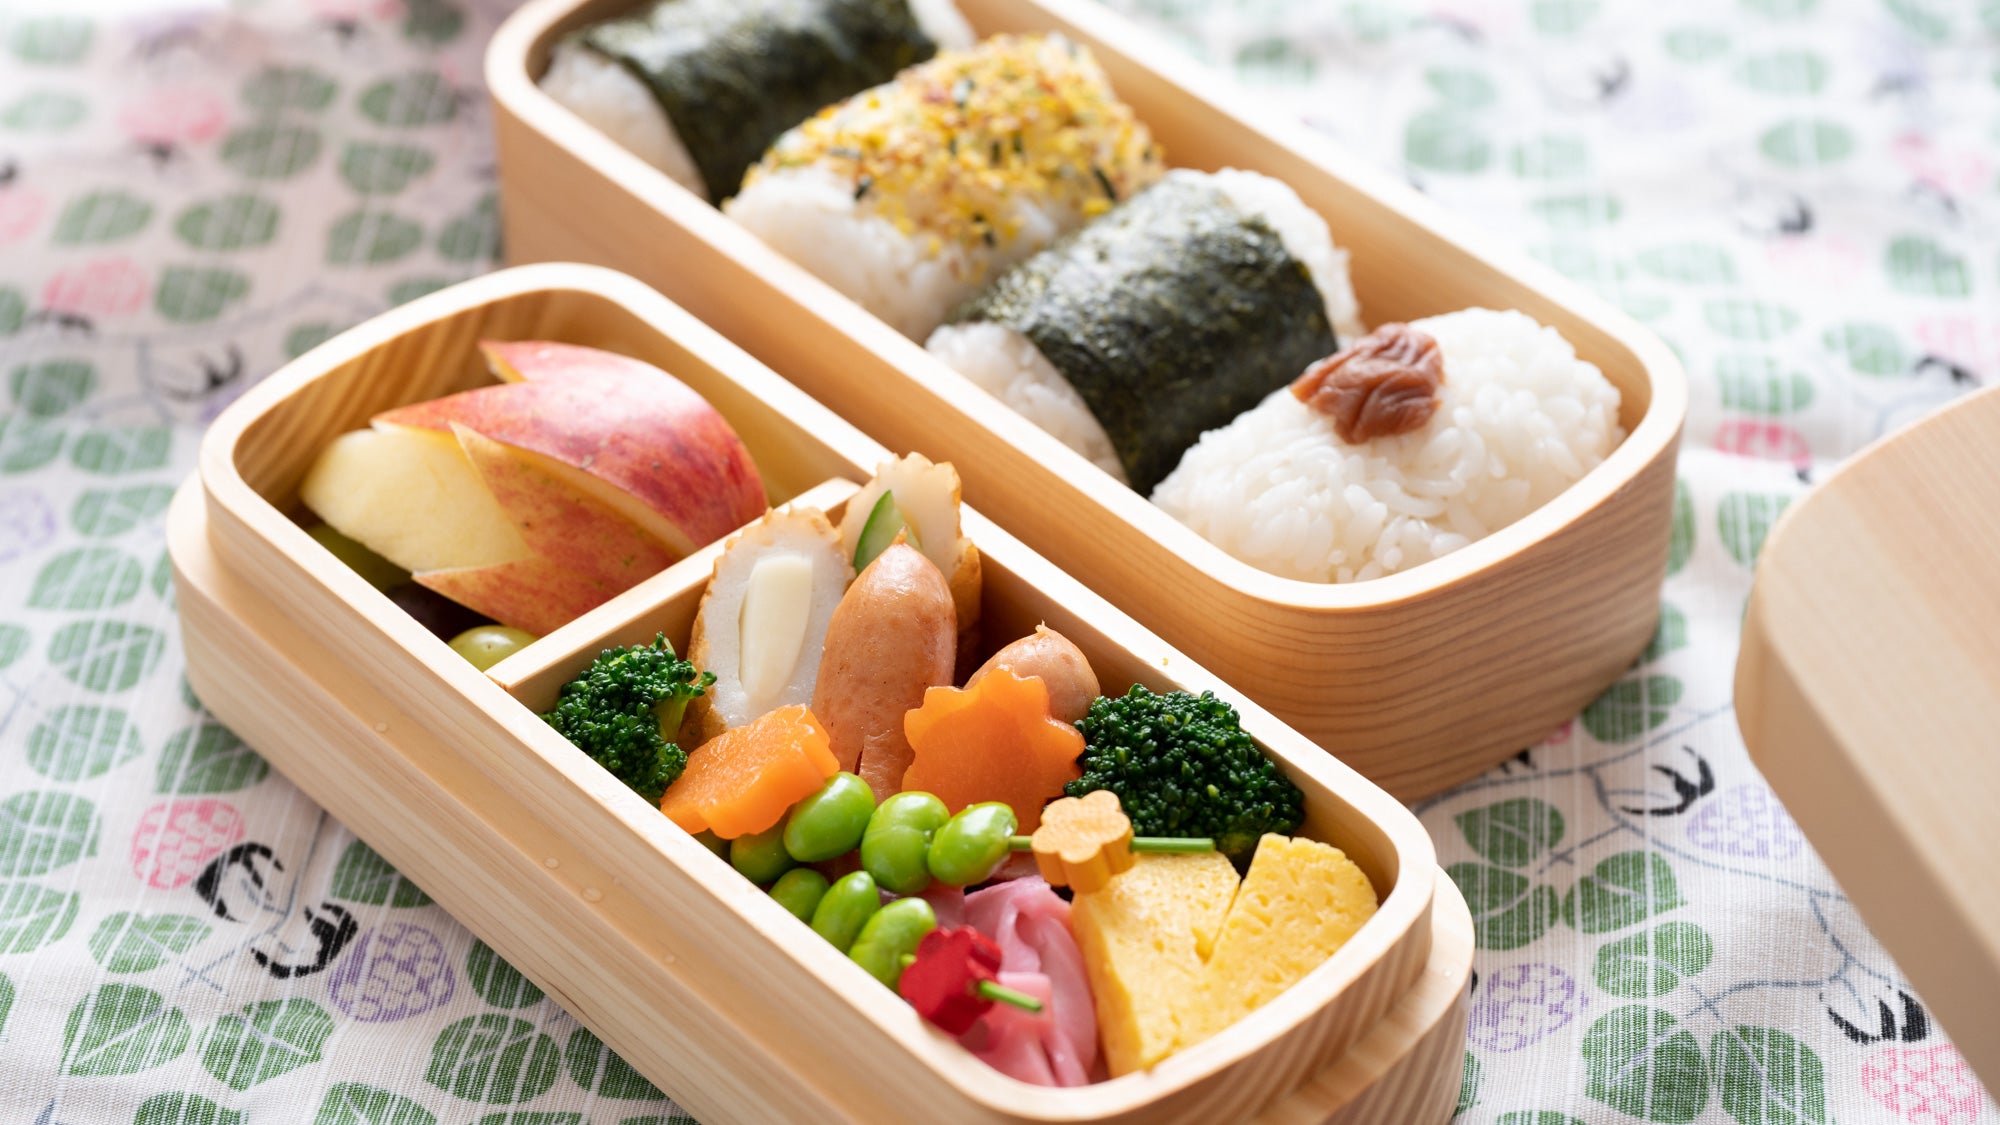 Fast, Fun & Fancy: Tips For Your Bento Box Masterpiece 